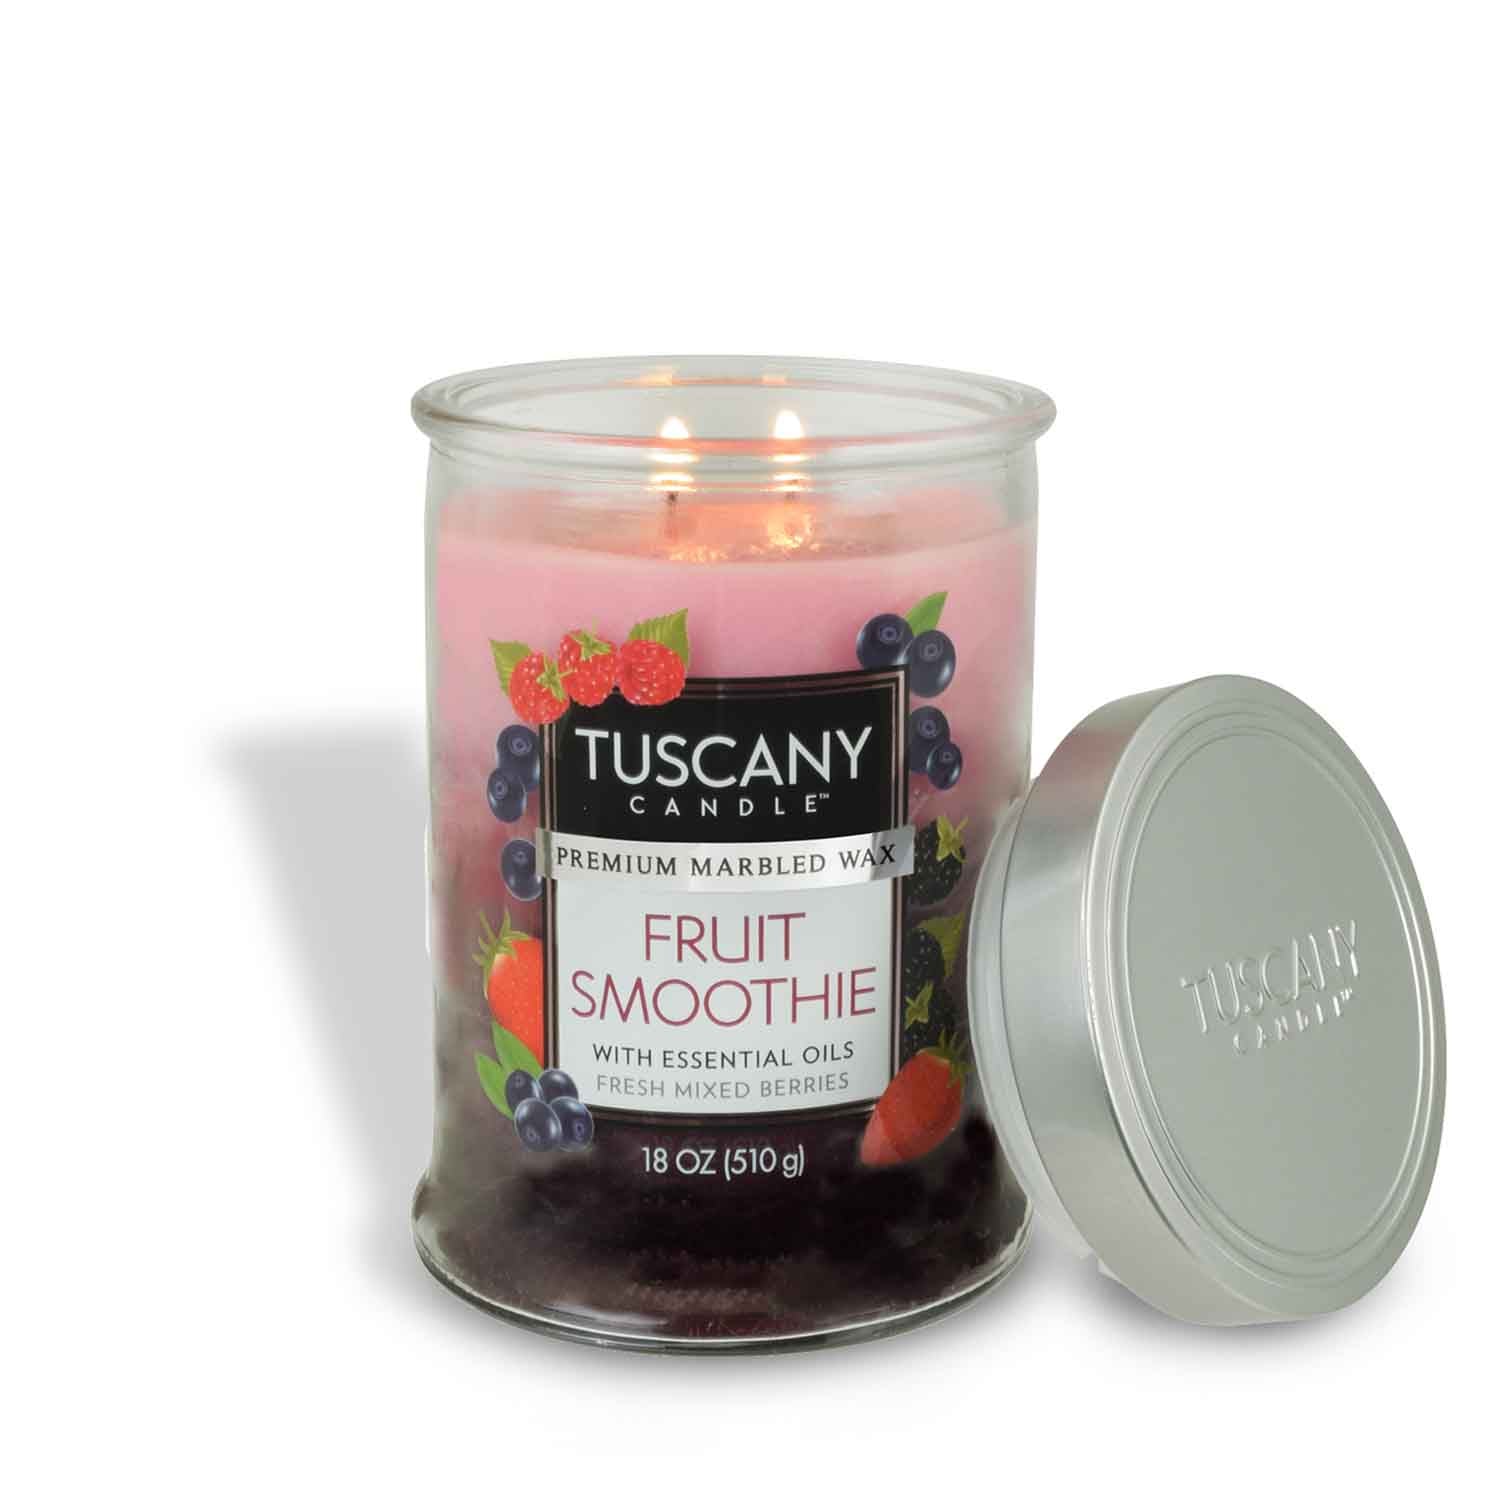 Fruit Smoothie Long-Lasting Scented Jar Candle (18 oz) by Tuscany Candle.